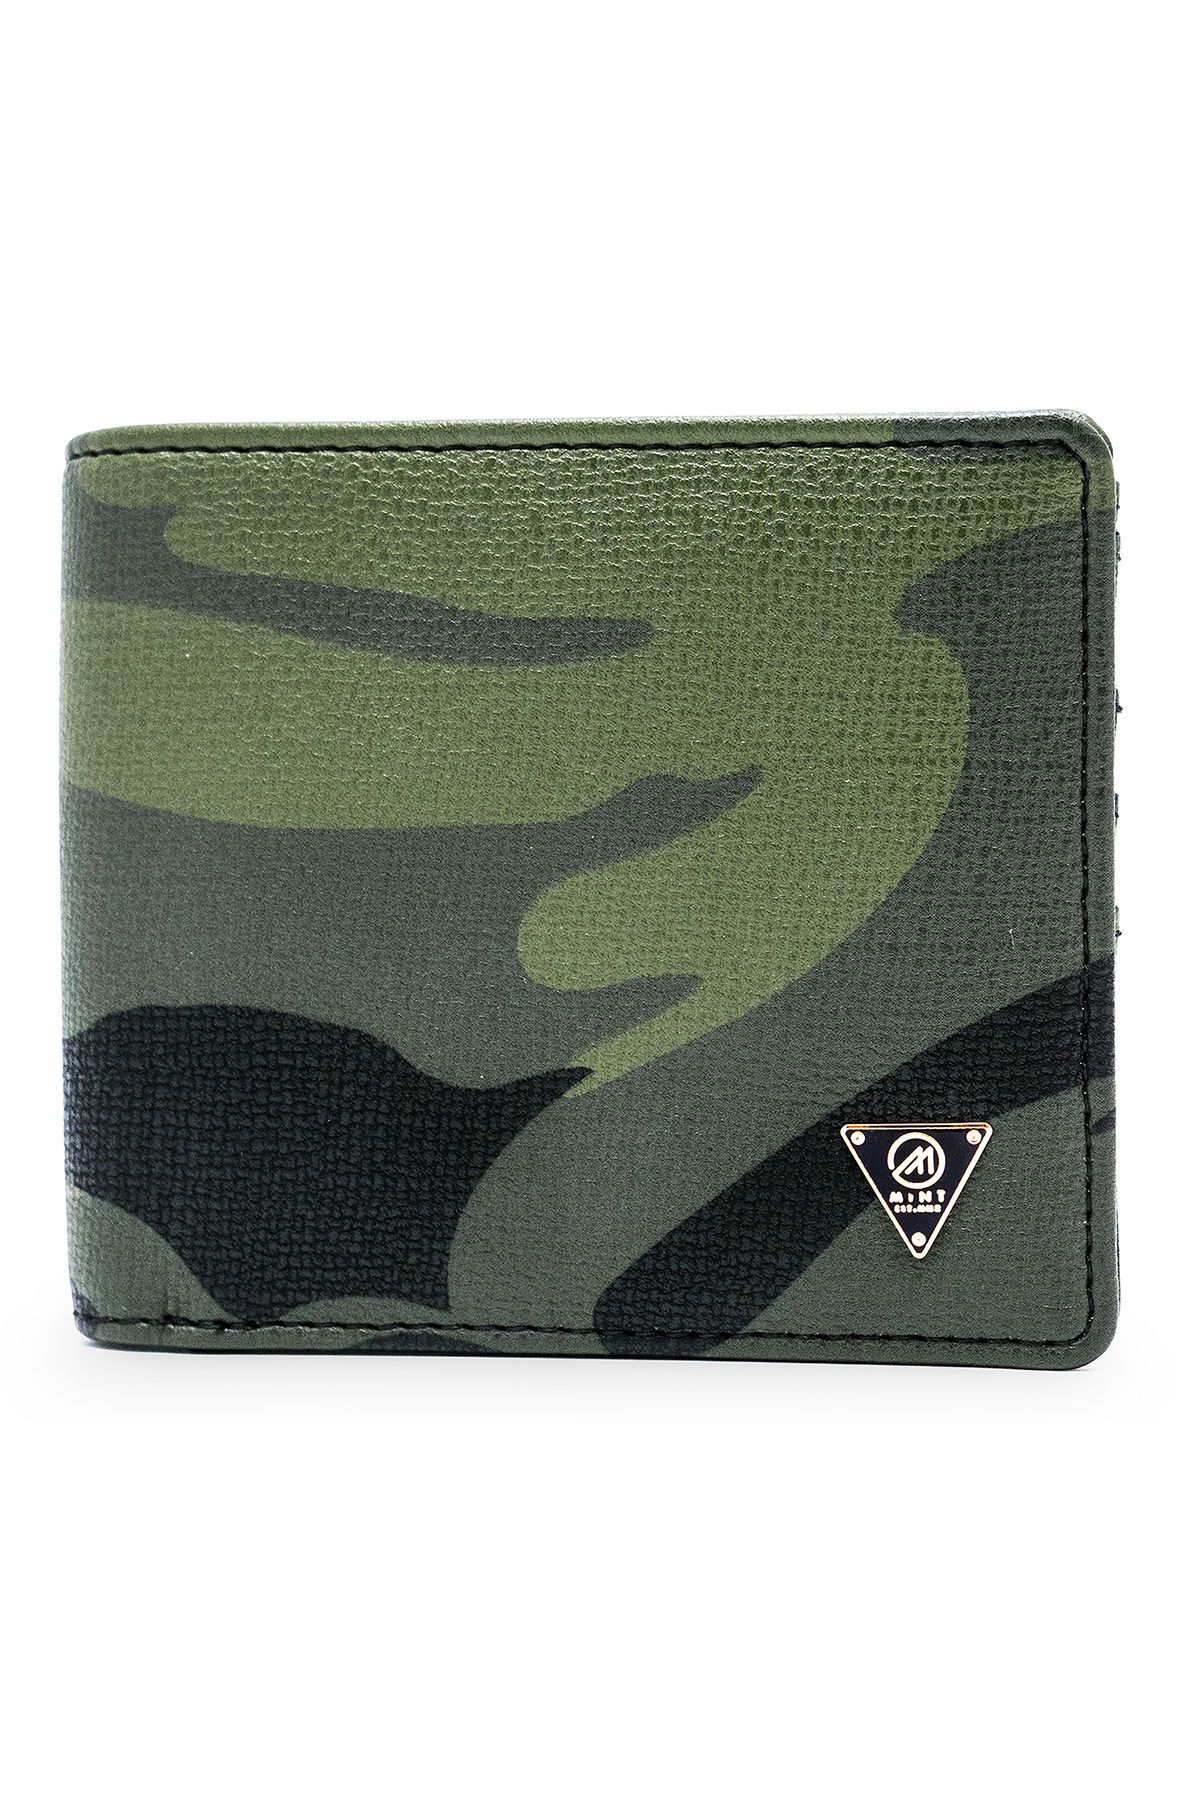 Human Made Leather Wallet Olive